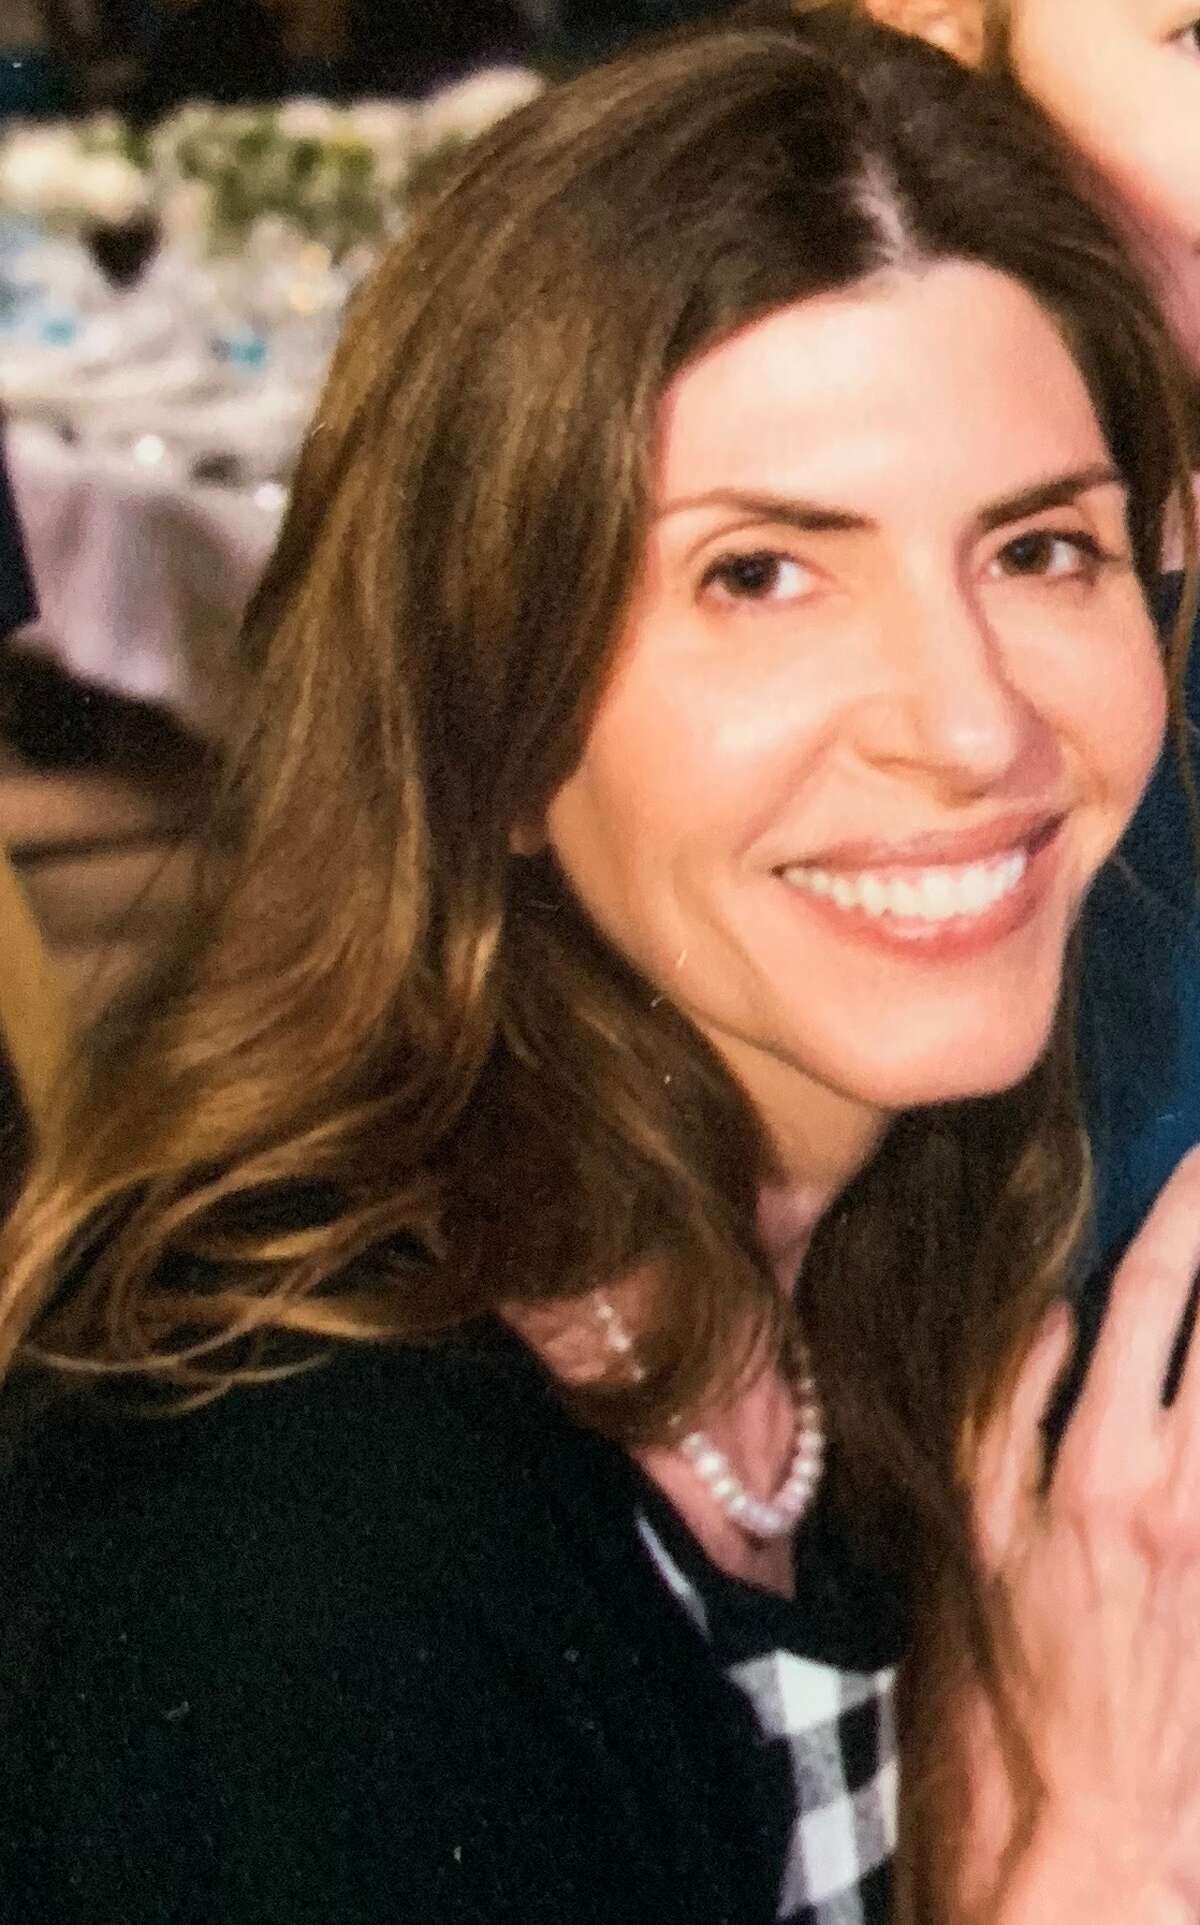 Jennifer Dulos was last seen on the morning of May 24, 2019. She is presumed dead, according to police, but her body has not been found.